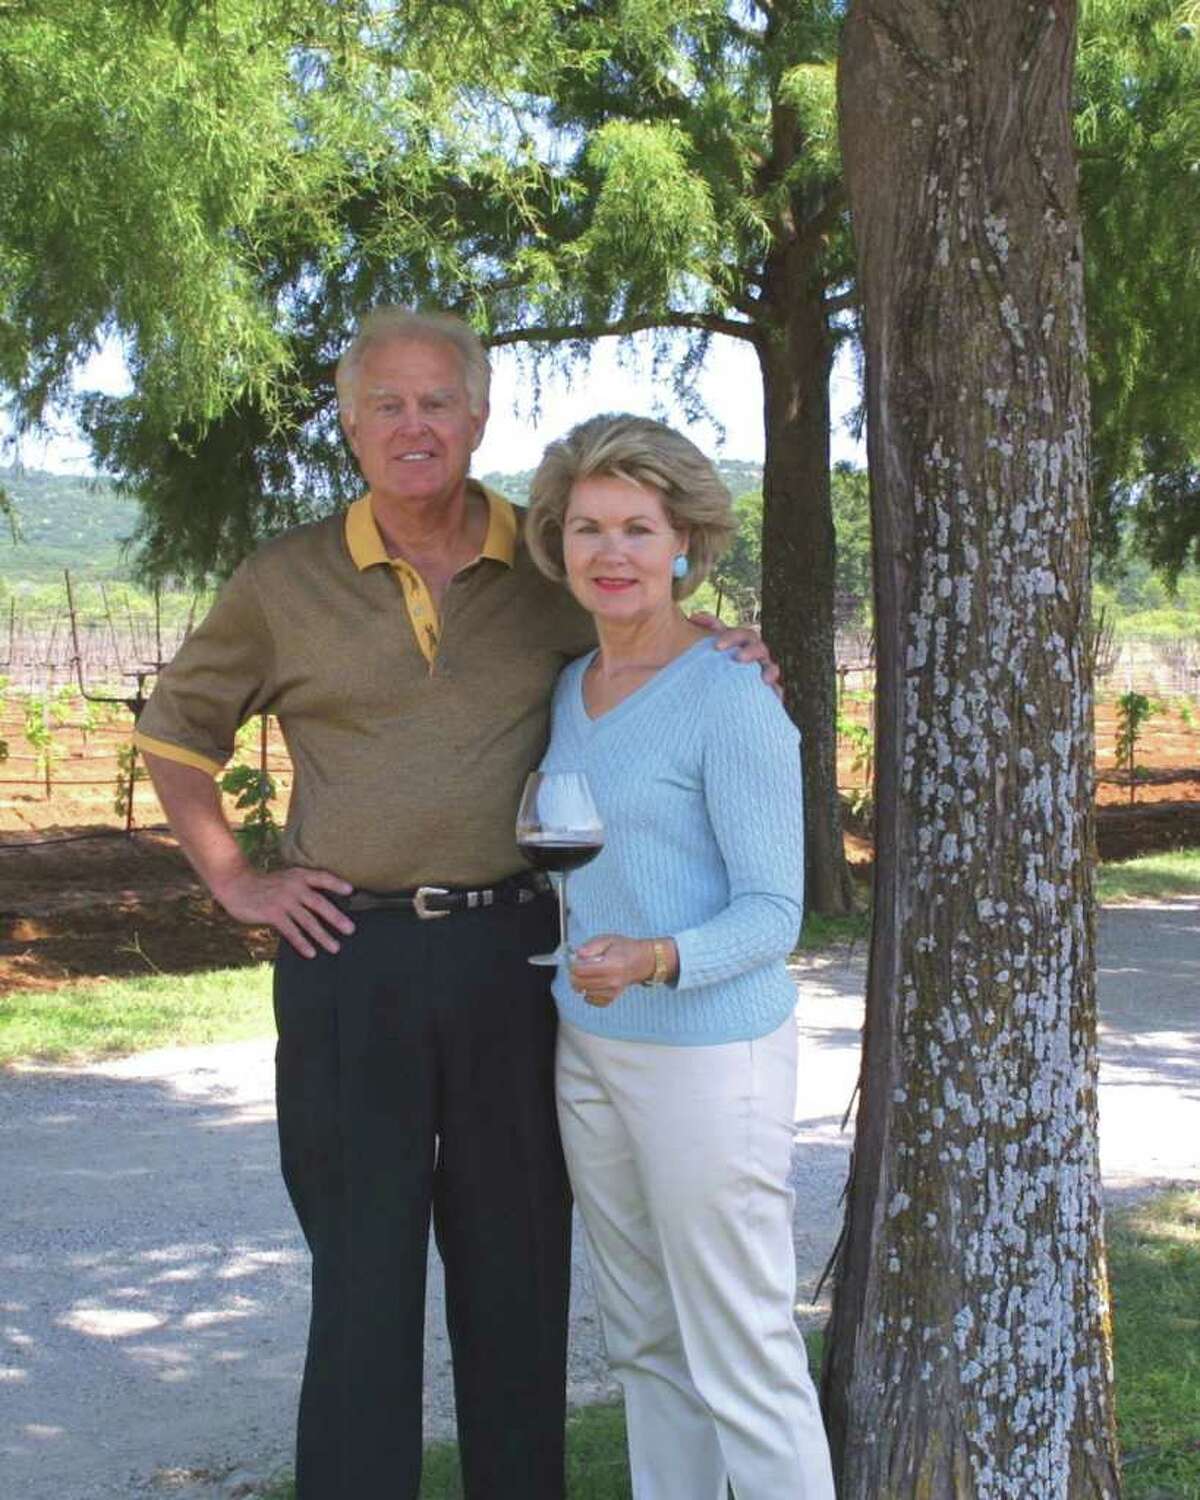 Ed and Susan Auler are the founders of Fall Creek Vineyards. Susan Auler Wrote the foreword to the book.